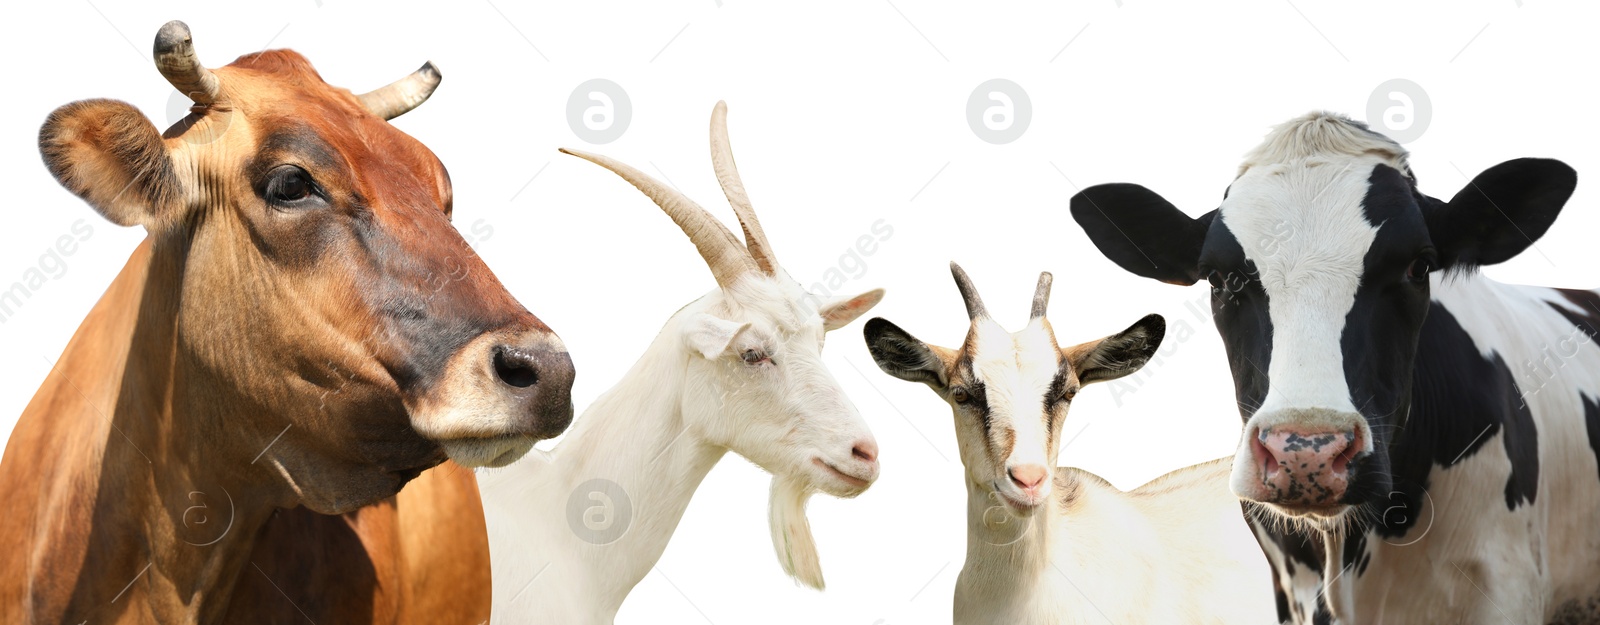 Image of Set with cute cows and goats on white background, banner design. Animal husbandry